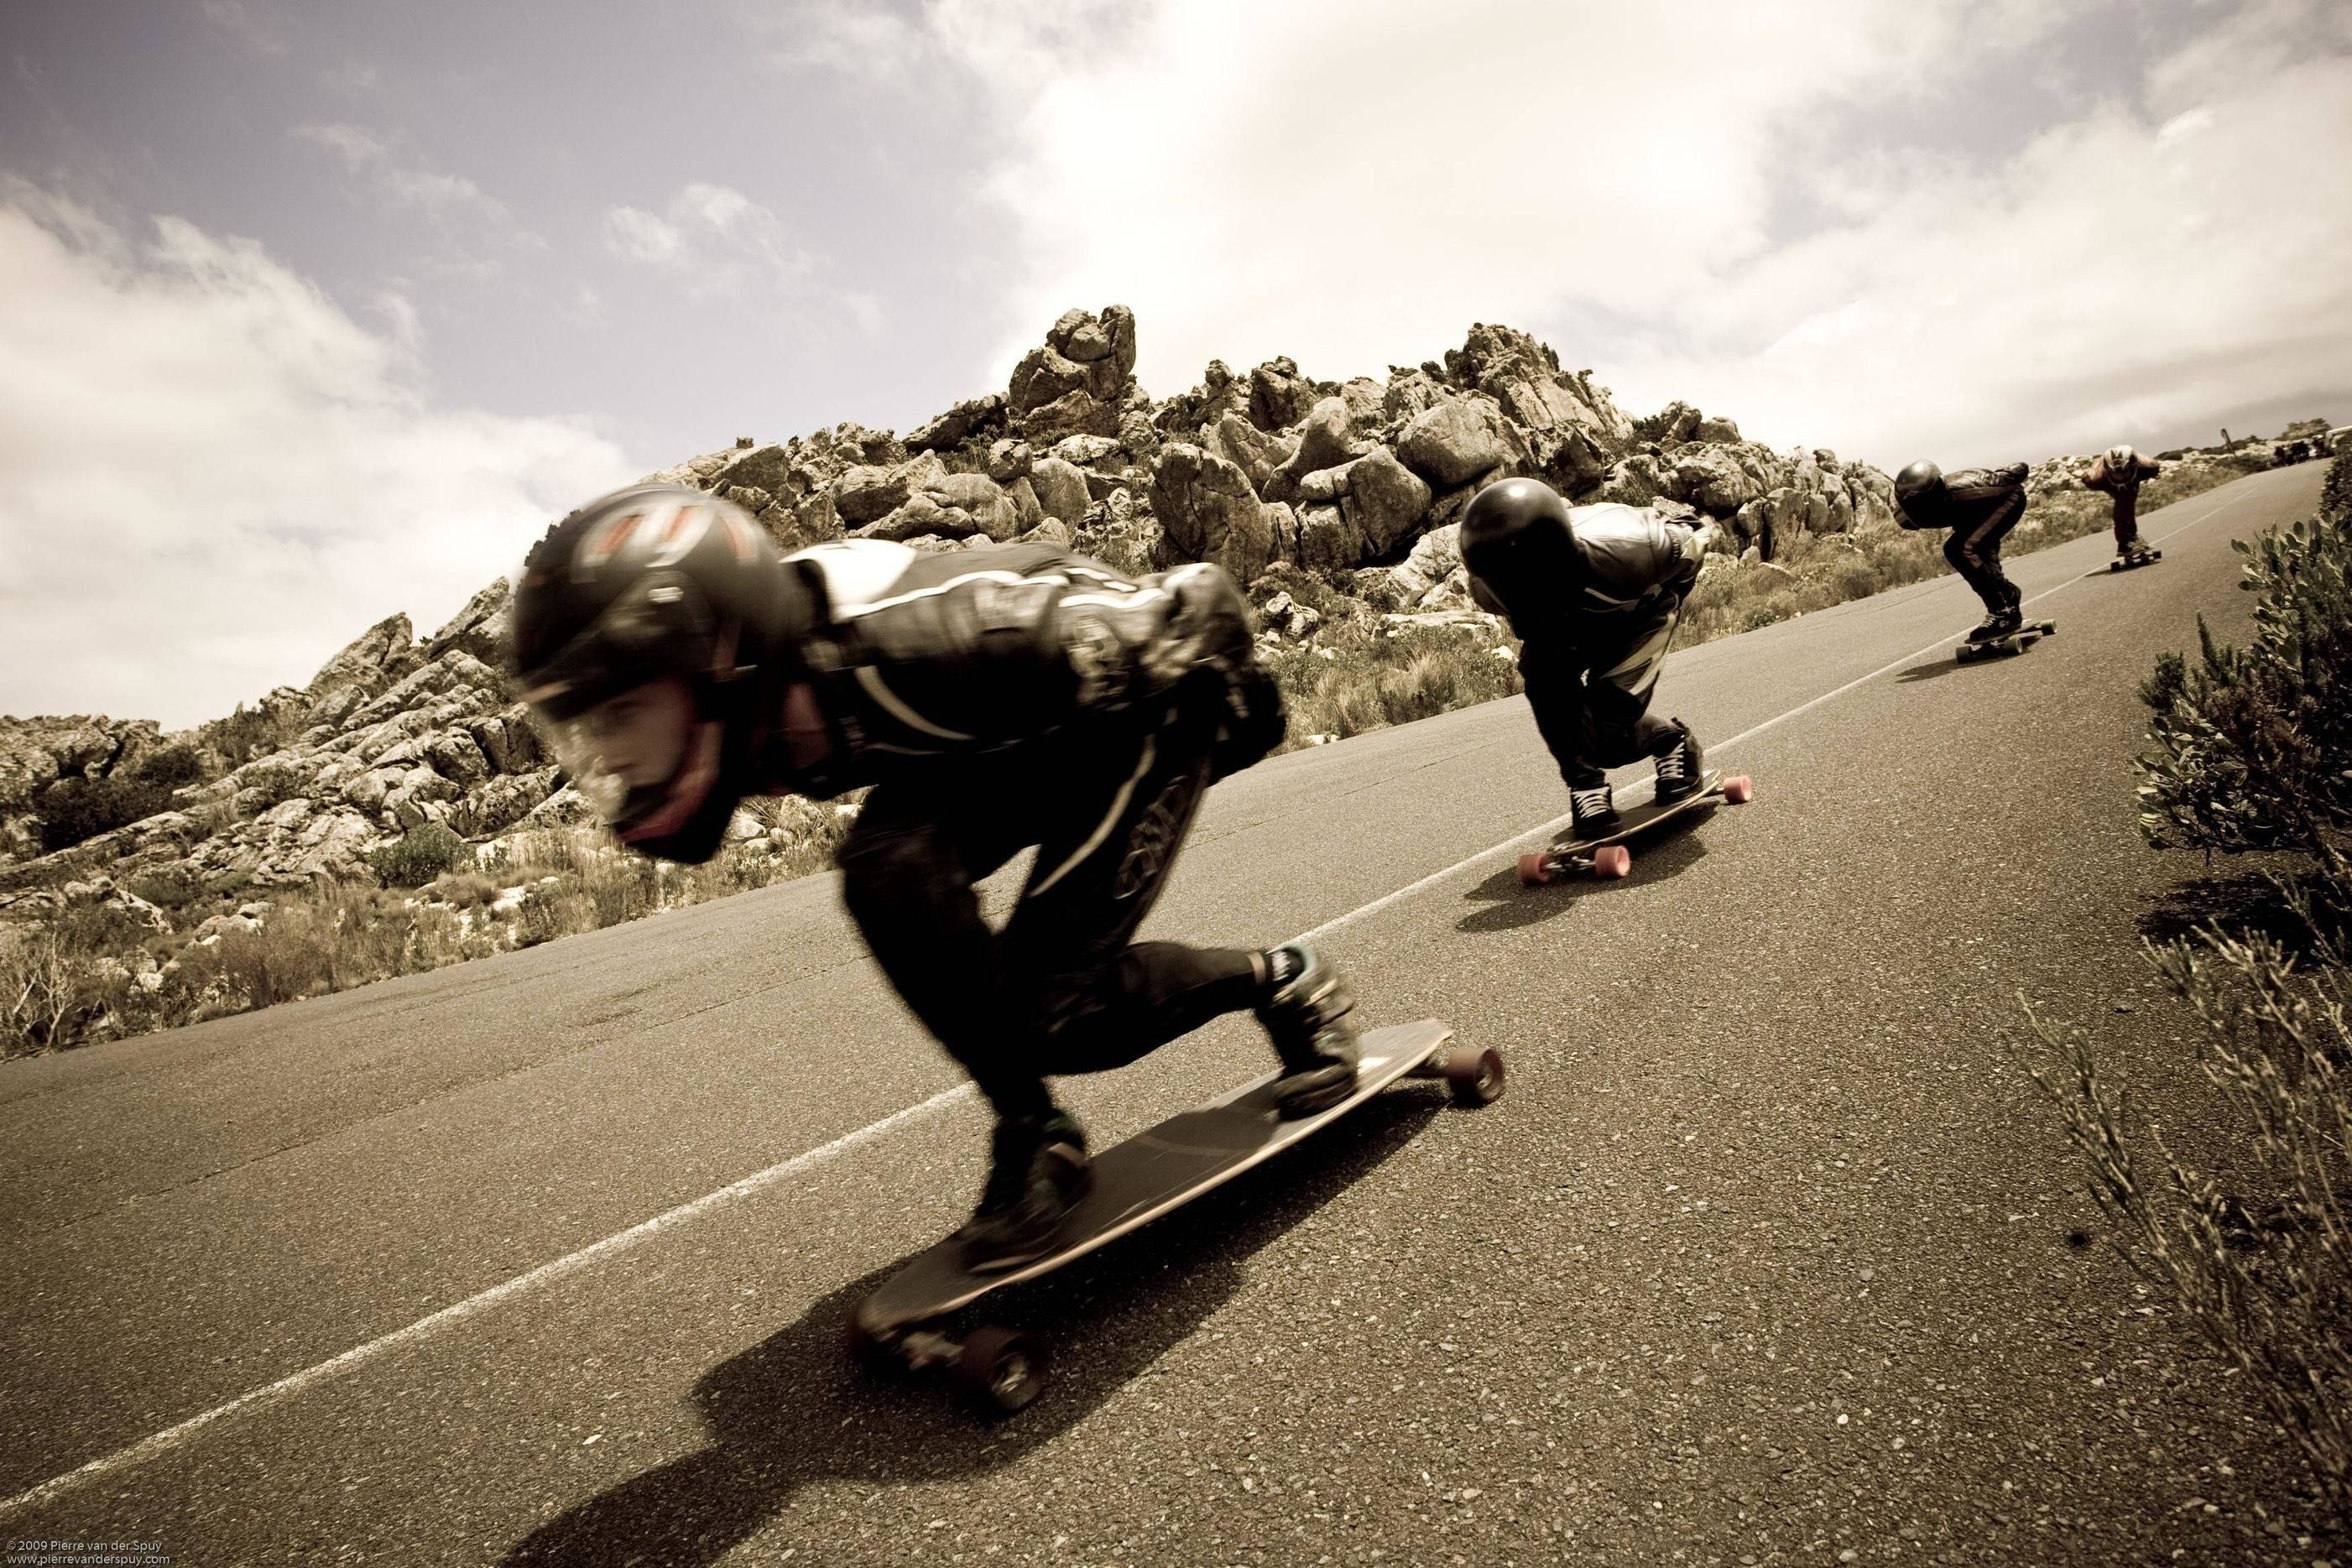 Longboarding: Downhill skateboard racing, Stand-up style competition. 2810x1870 HD Wallpaper.